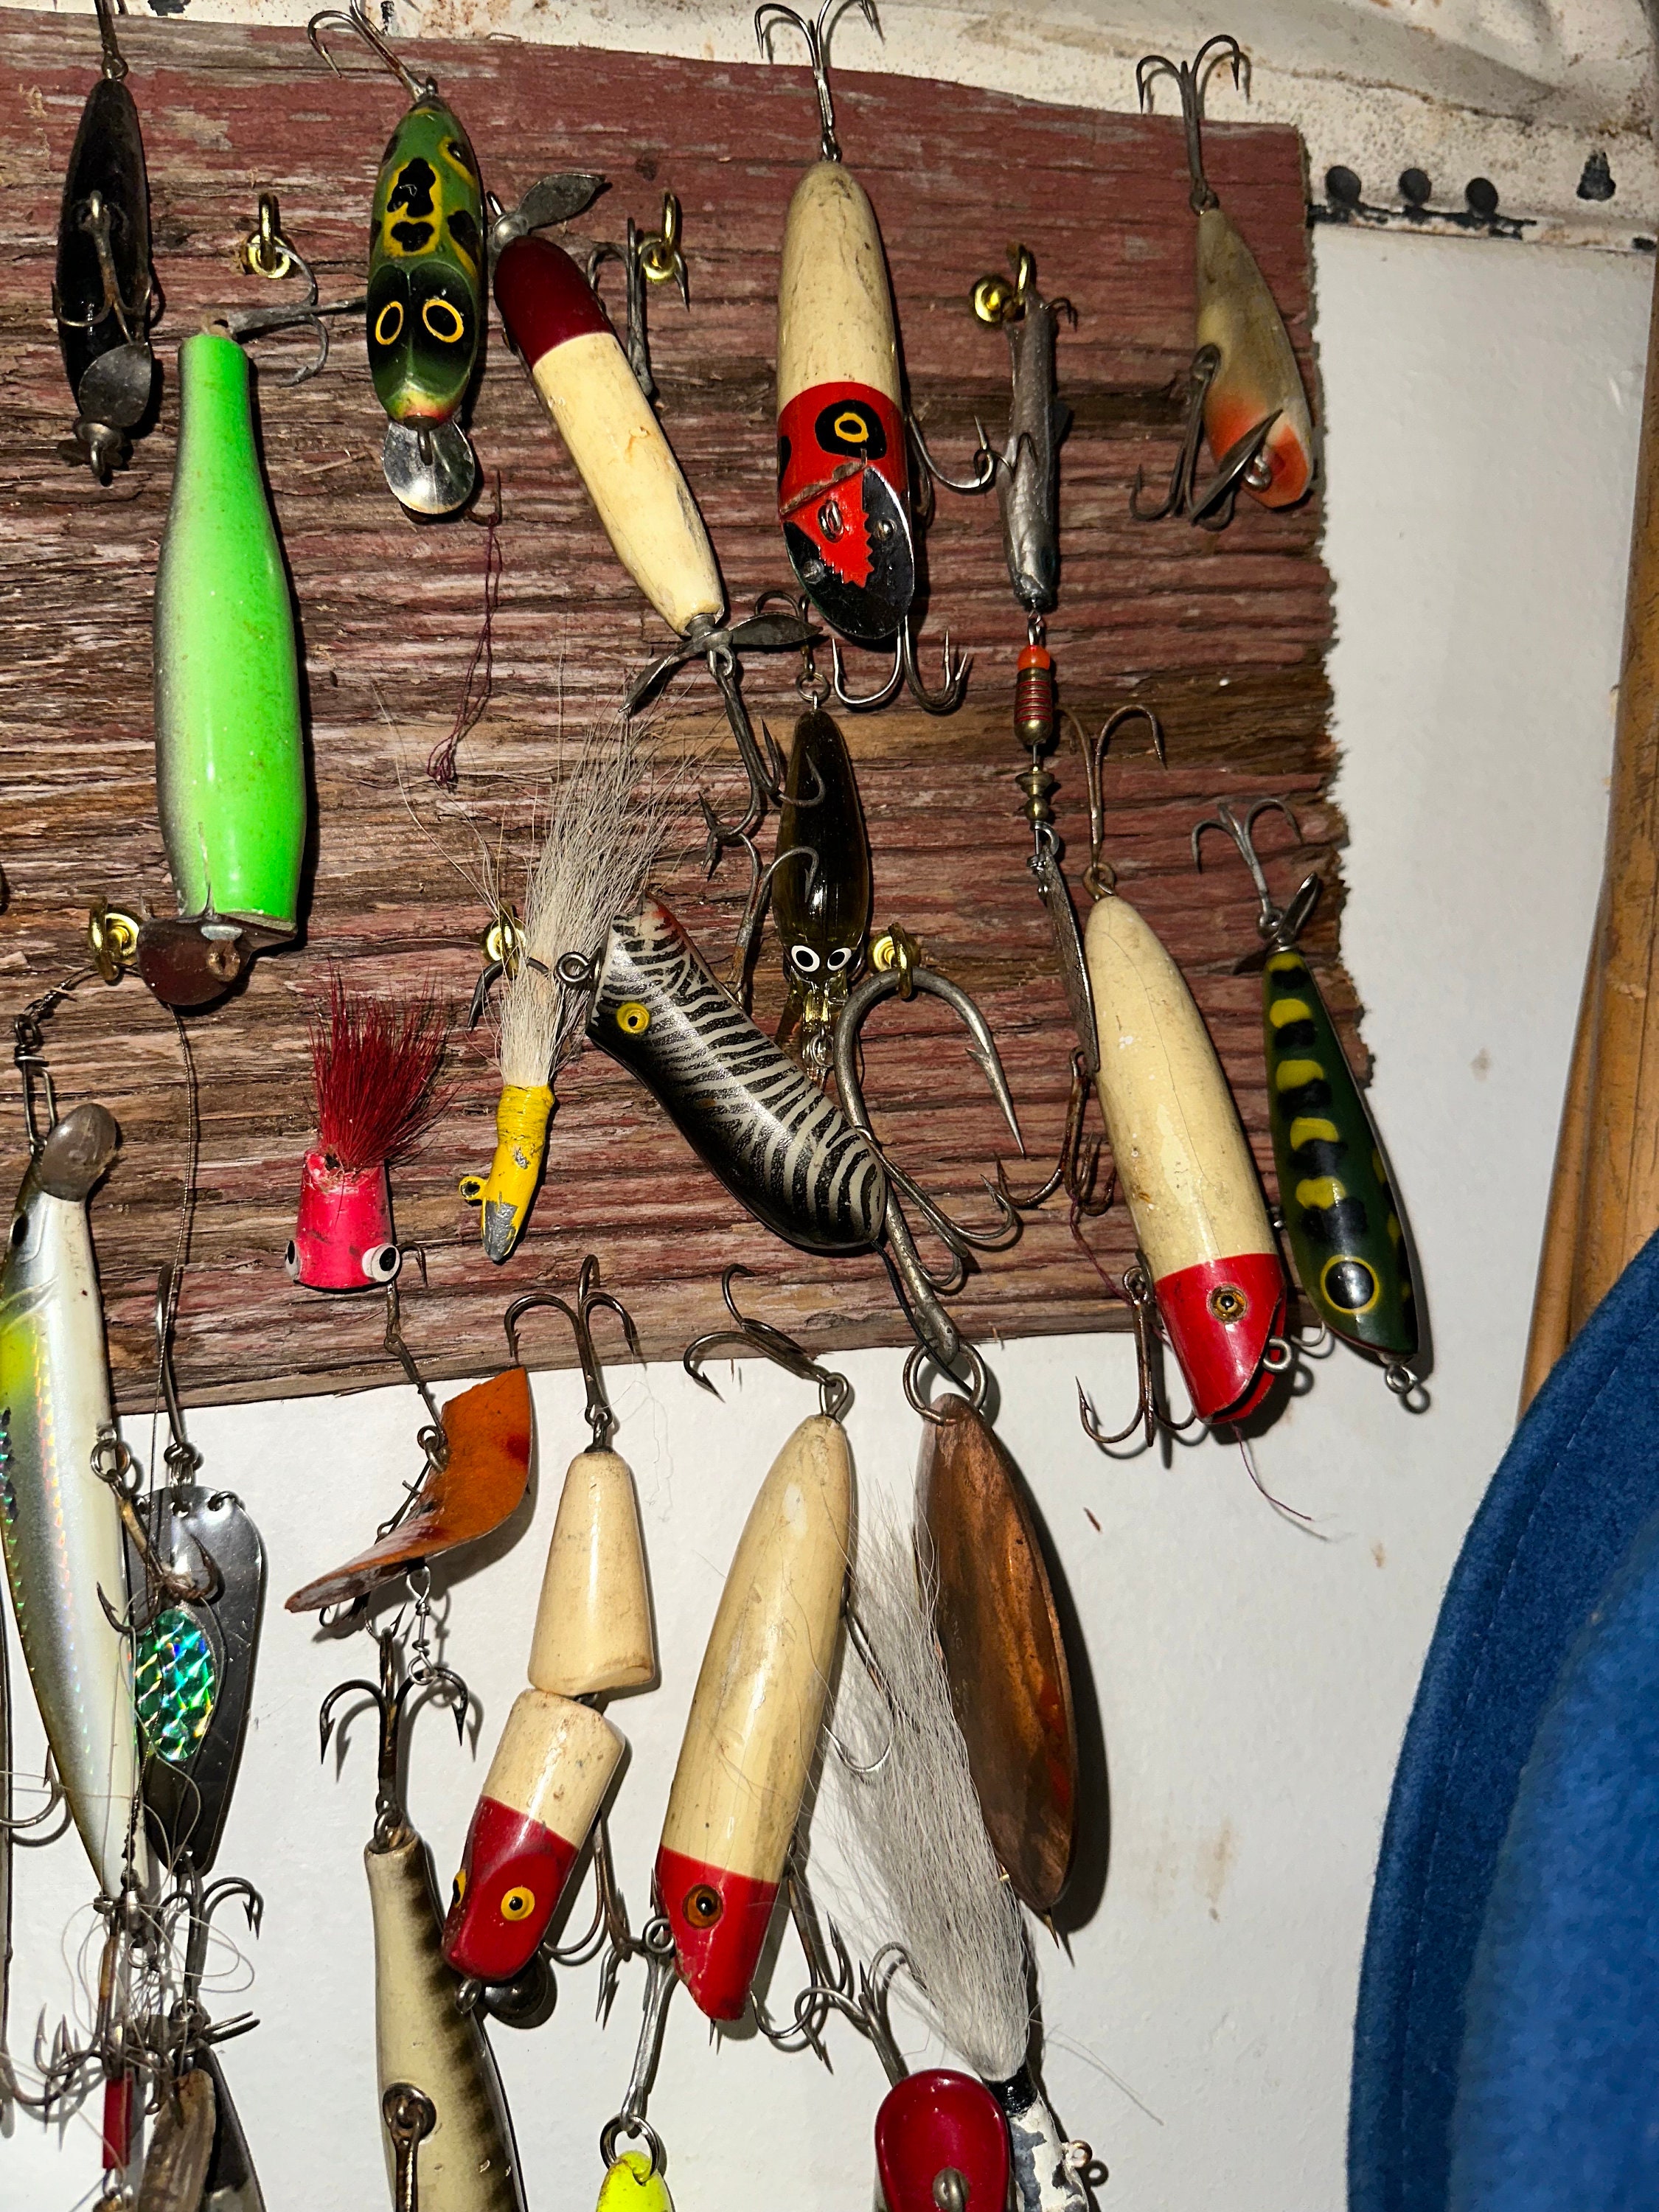 Antique/vintage Fishing Lure, Tackle, Gear, Freshwater, Saltwater, Fishing,  Bait, Listing is for One Lure Only 